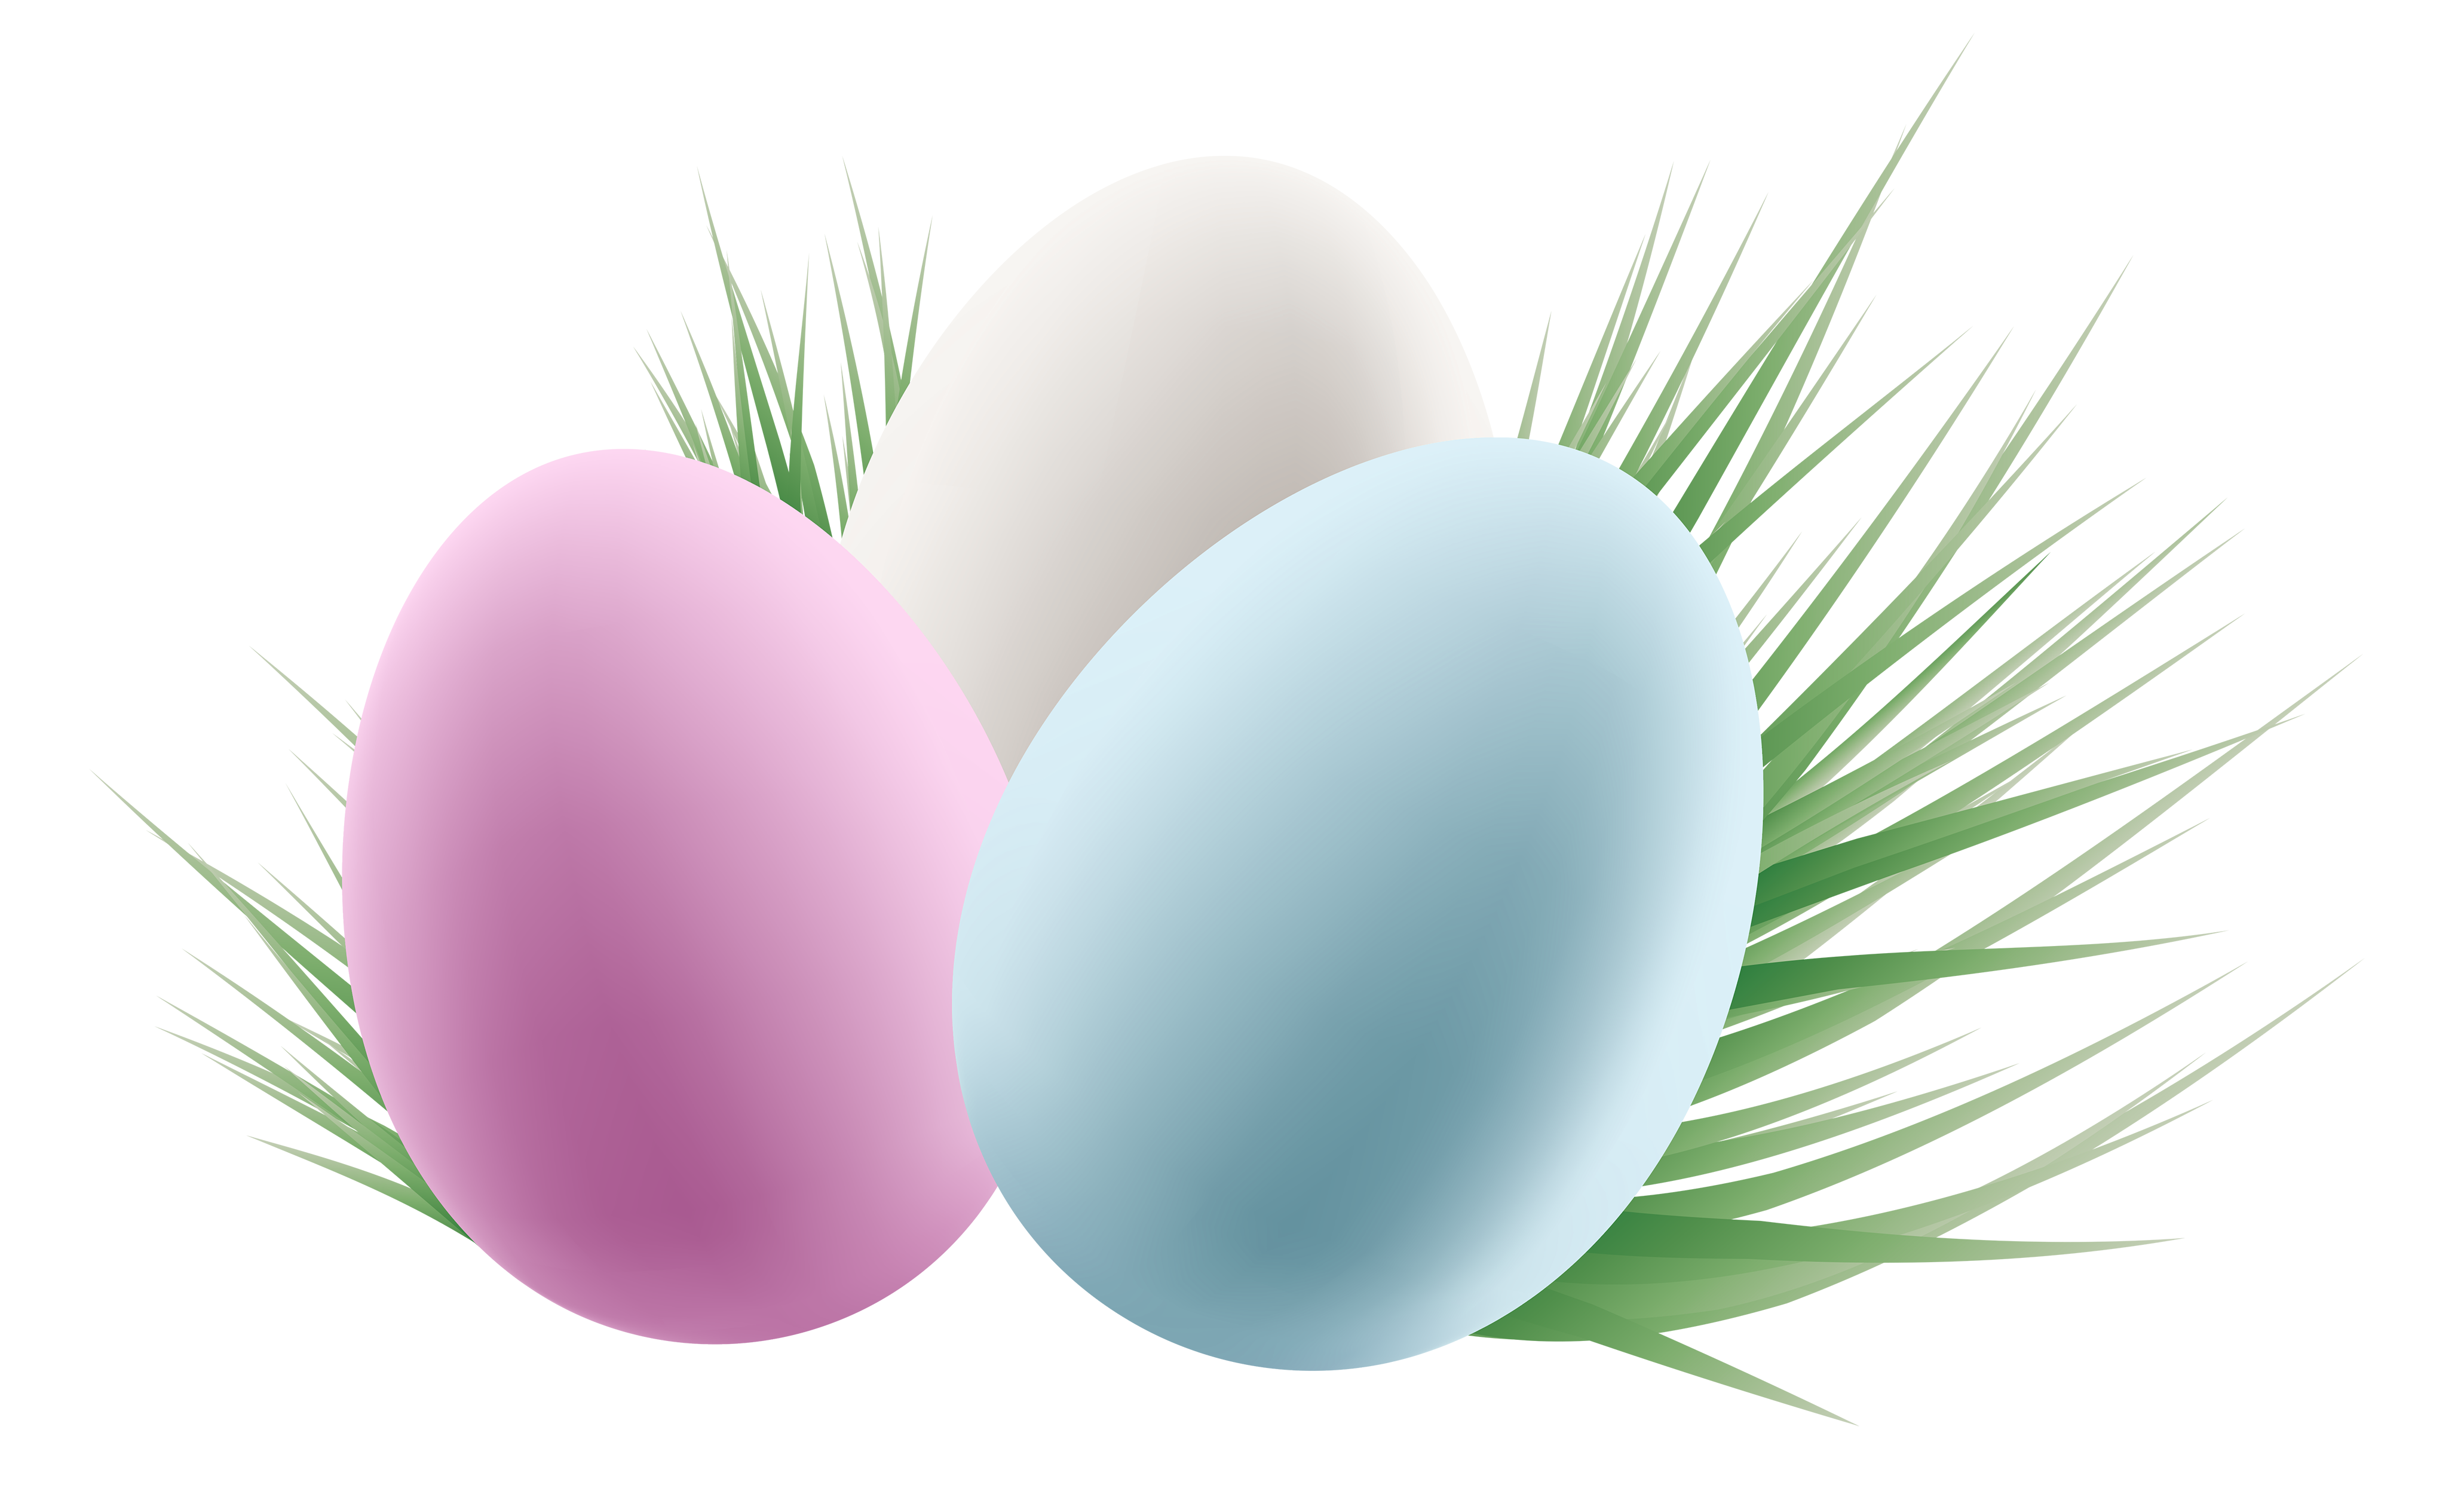 Transparent Easter Eggs and Grass PNG Clipart Picture​  Gallery  Yopriceville - High-Quality Free Images and Transparent PNG Clipart